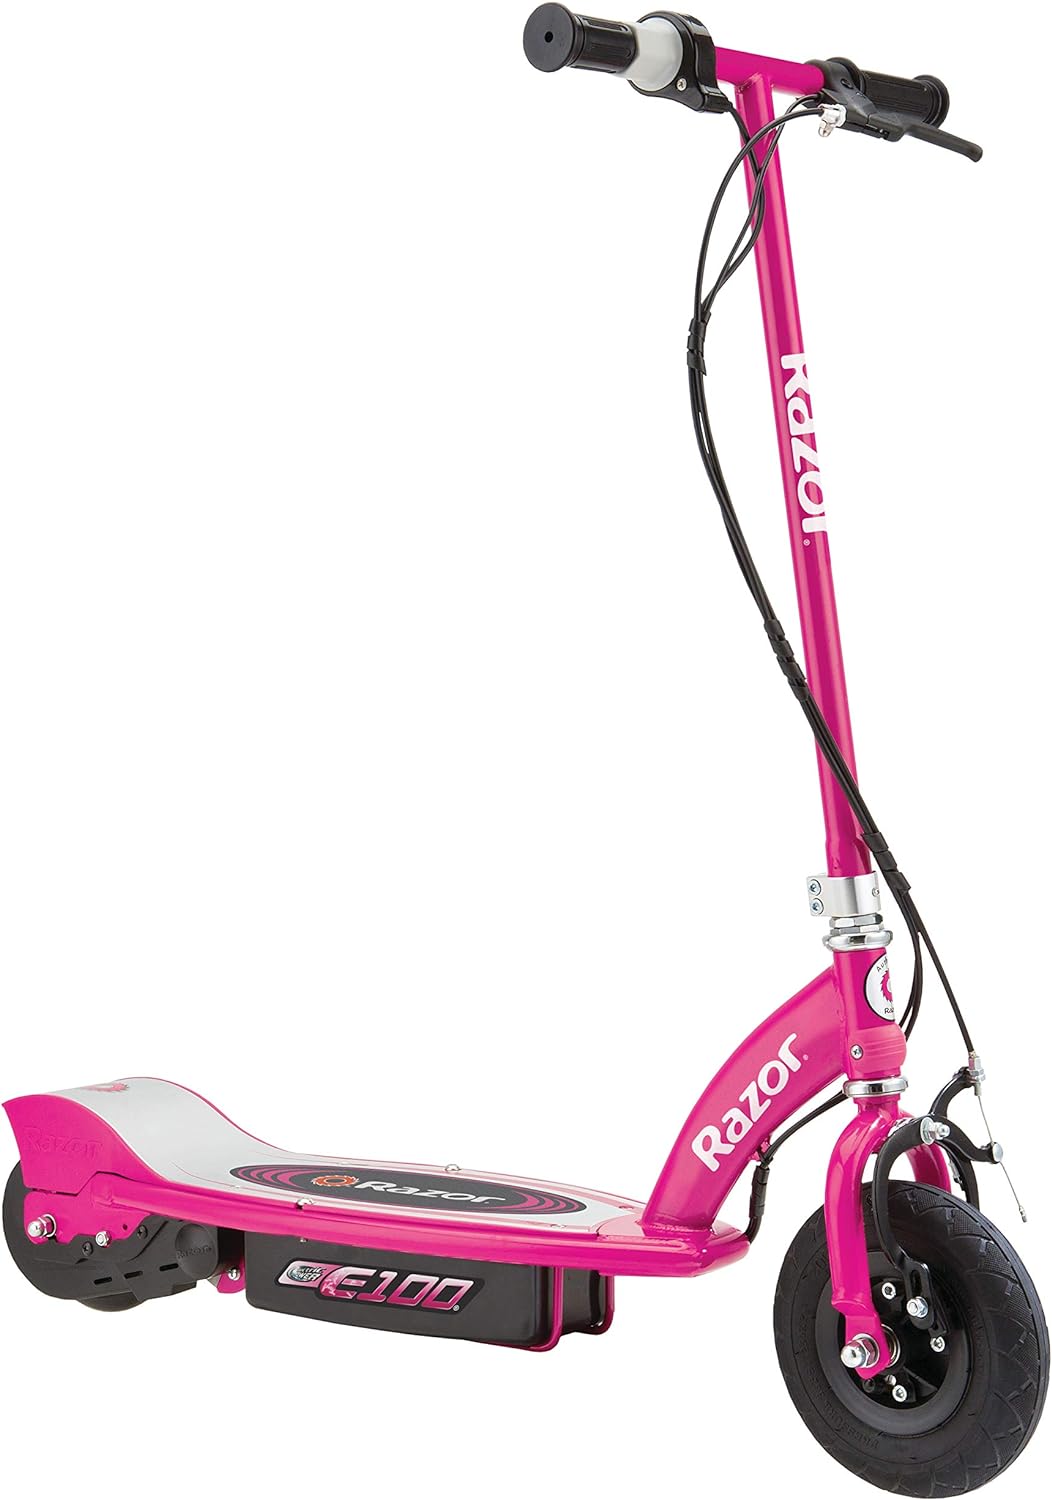 Kid’s Electric Scooter Review